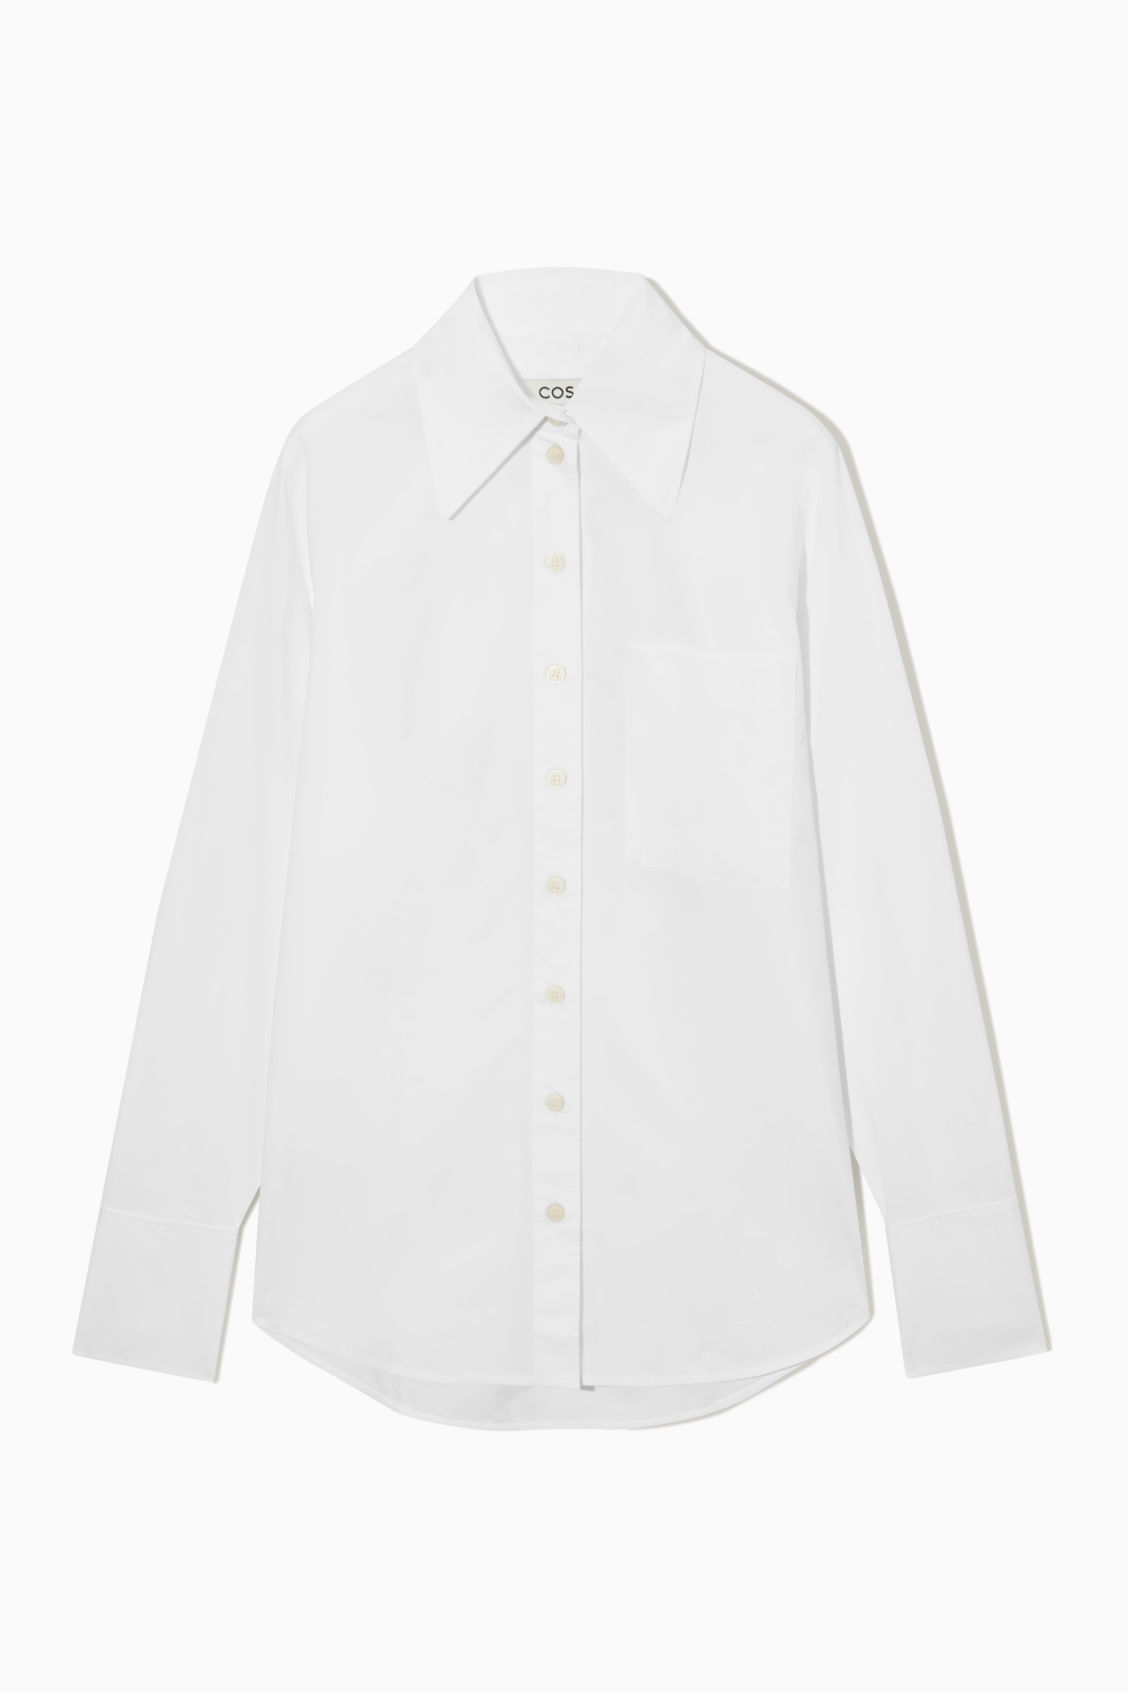 COS + Oversized Tailored Shirt in White